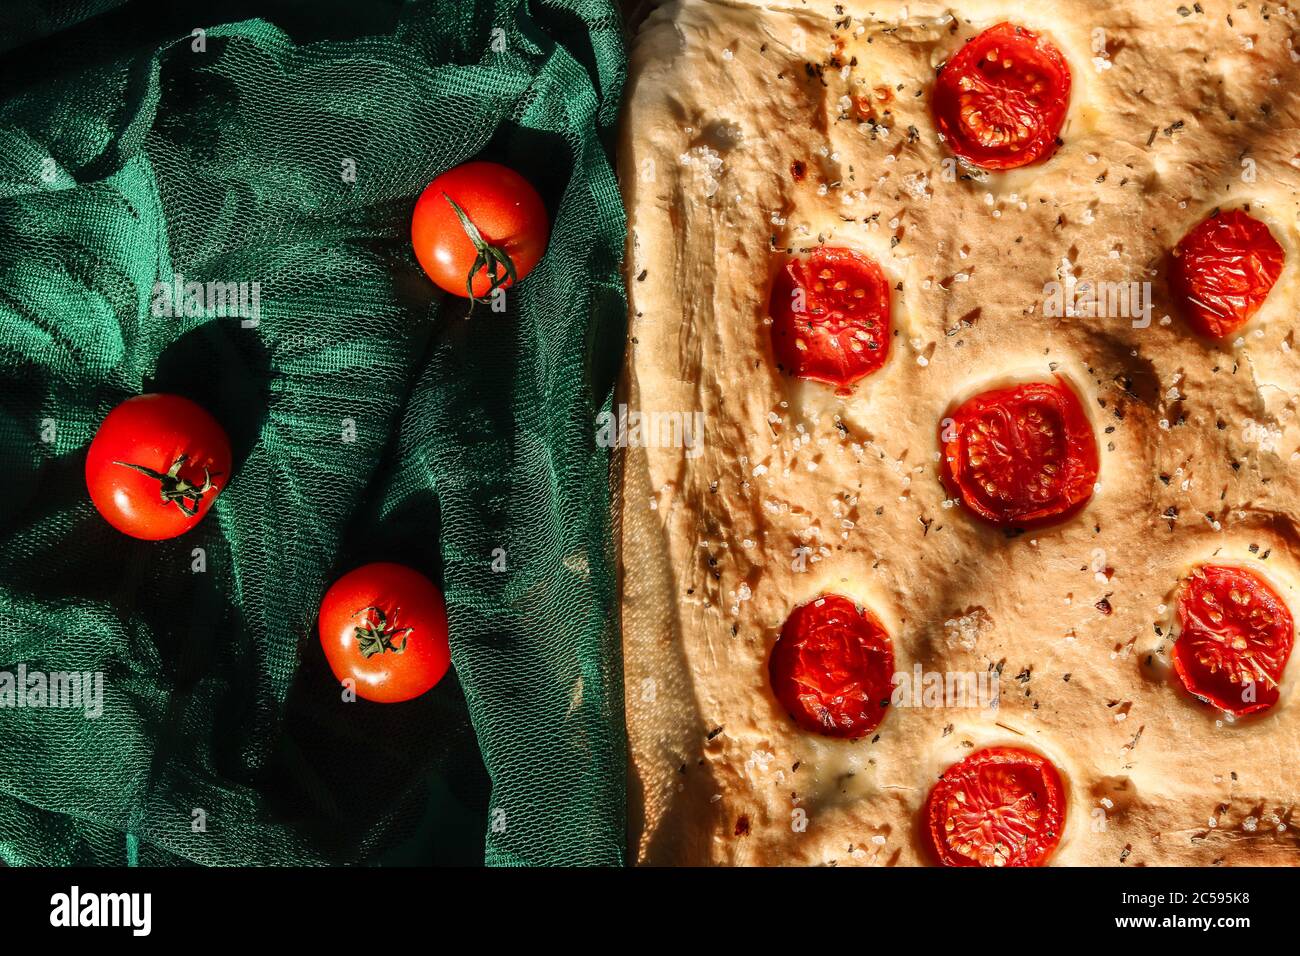 Focaccia italian bread with cherry tomatoes on a green guipure lace cloth. Stock Photo